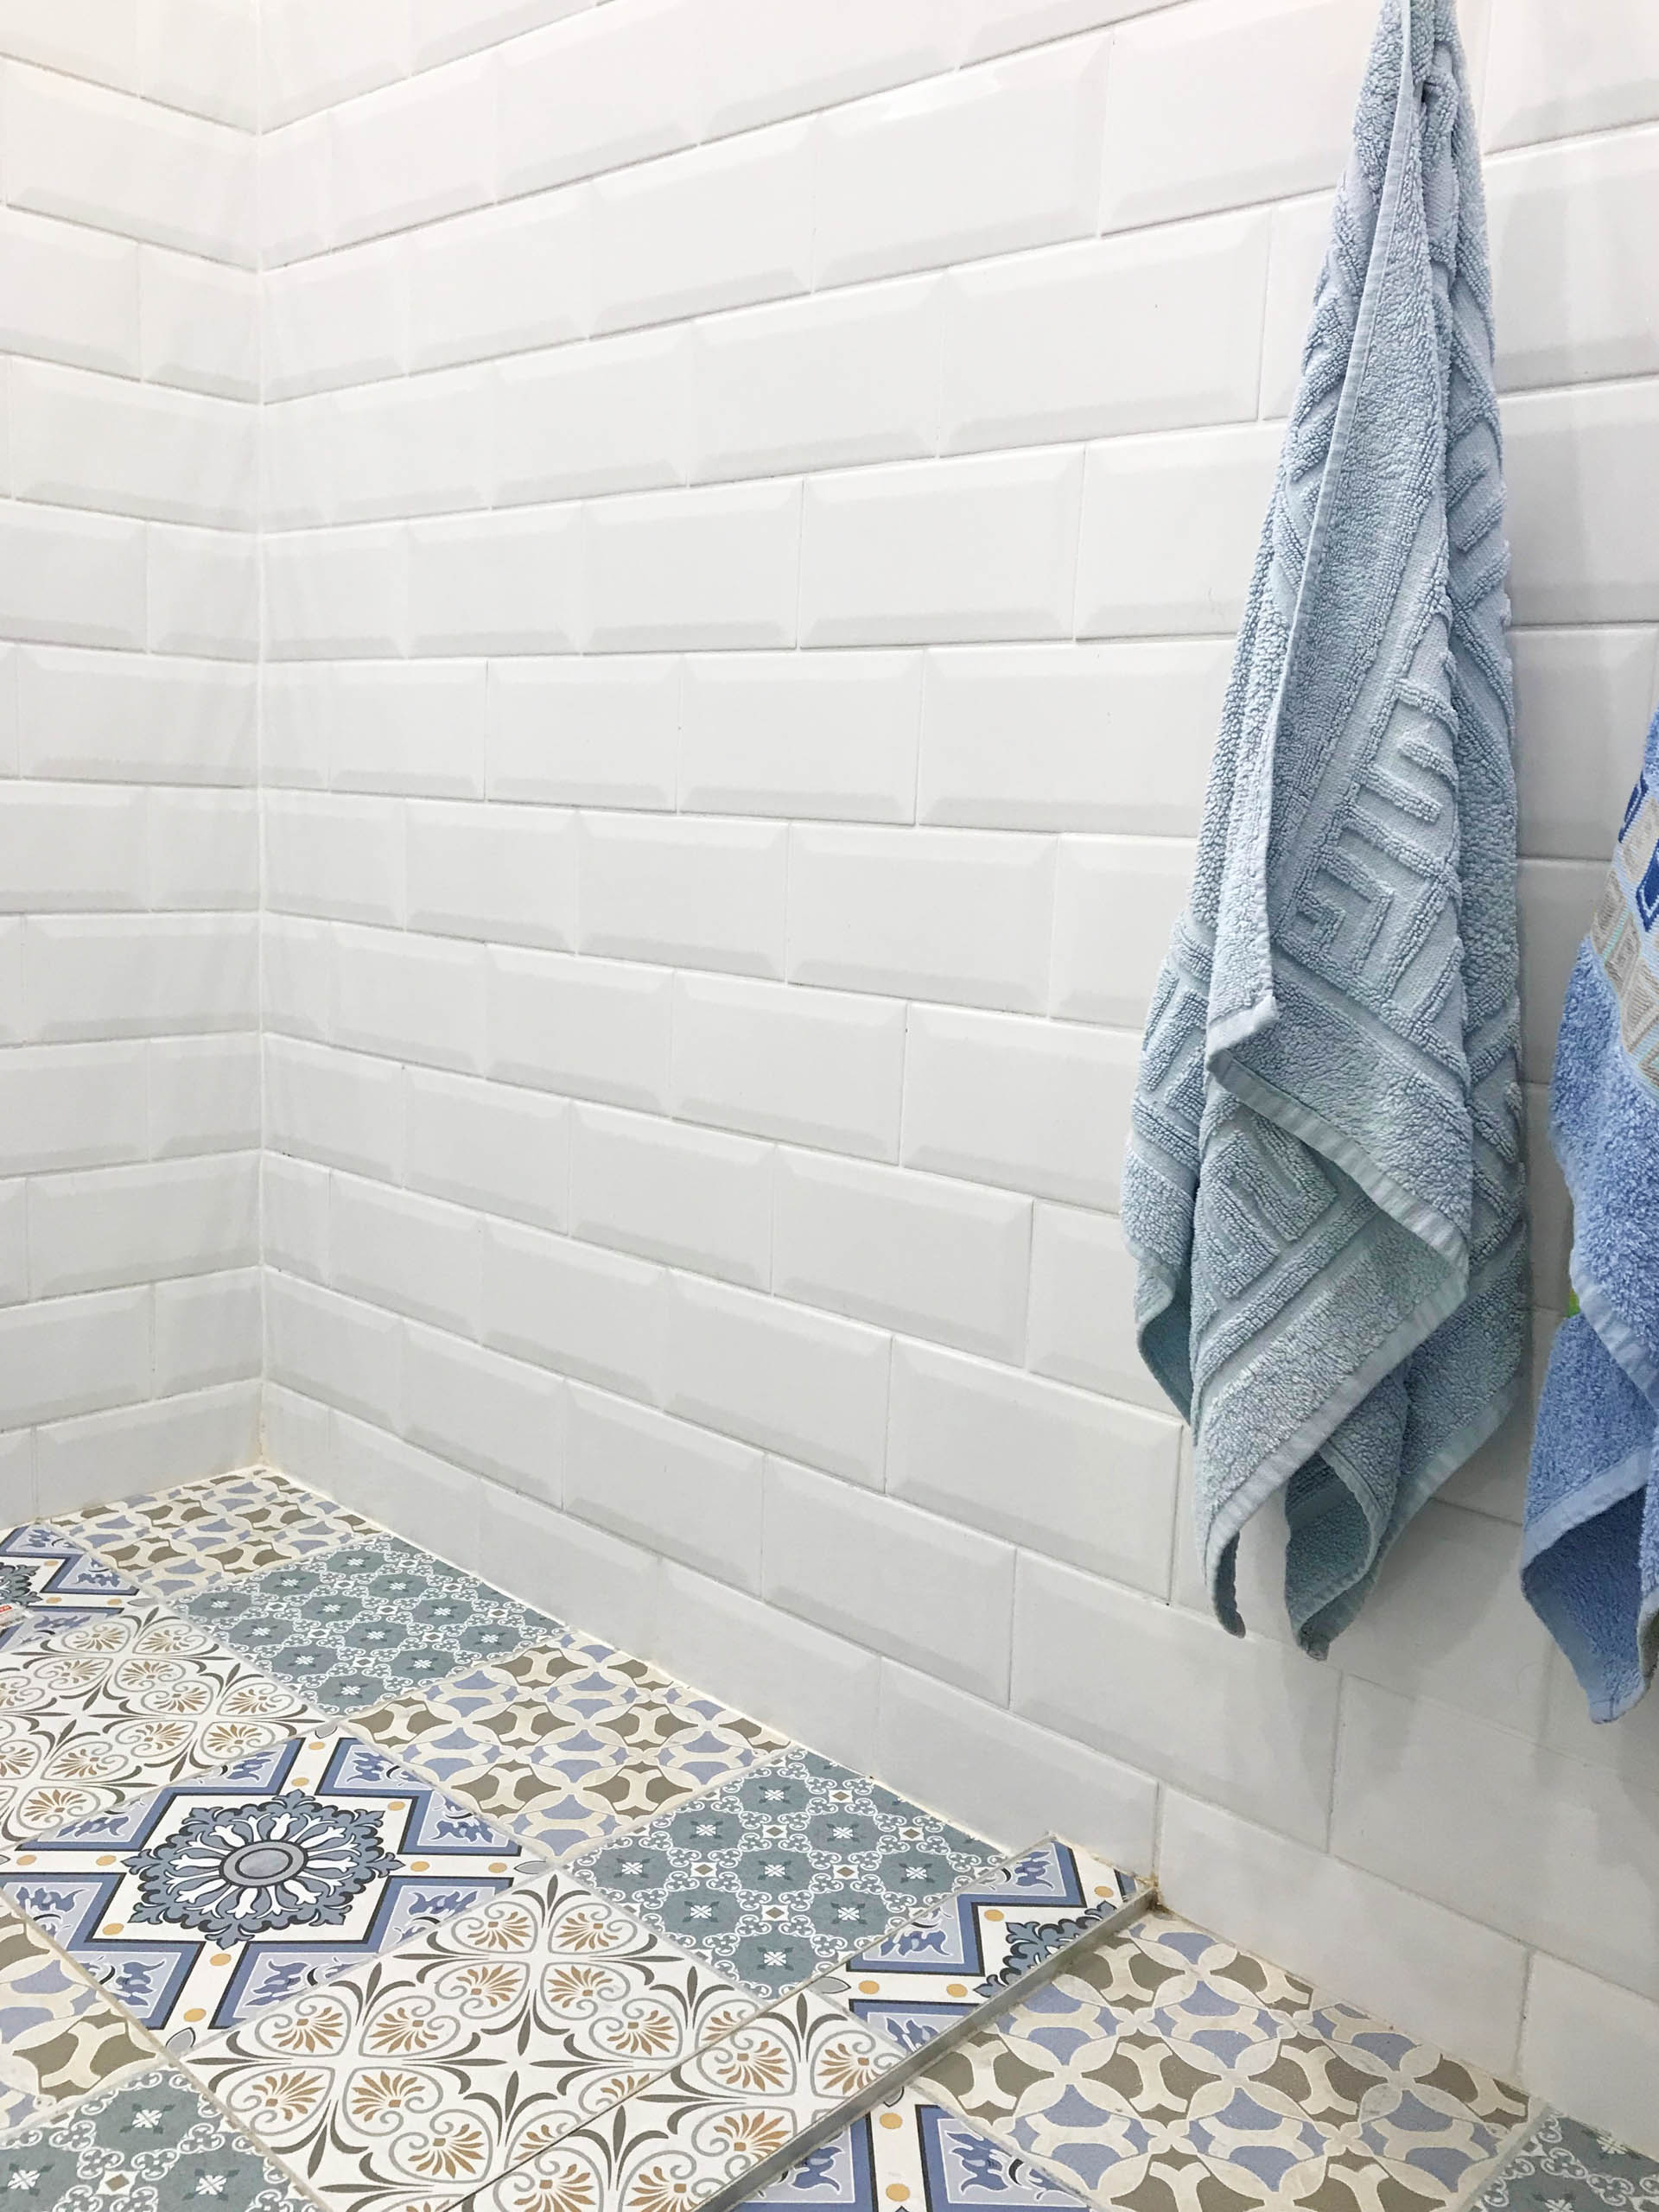 White and blue bathroom remodeling with blue textile